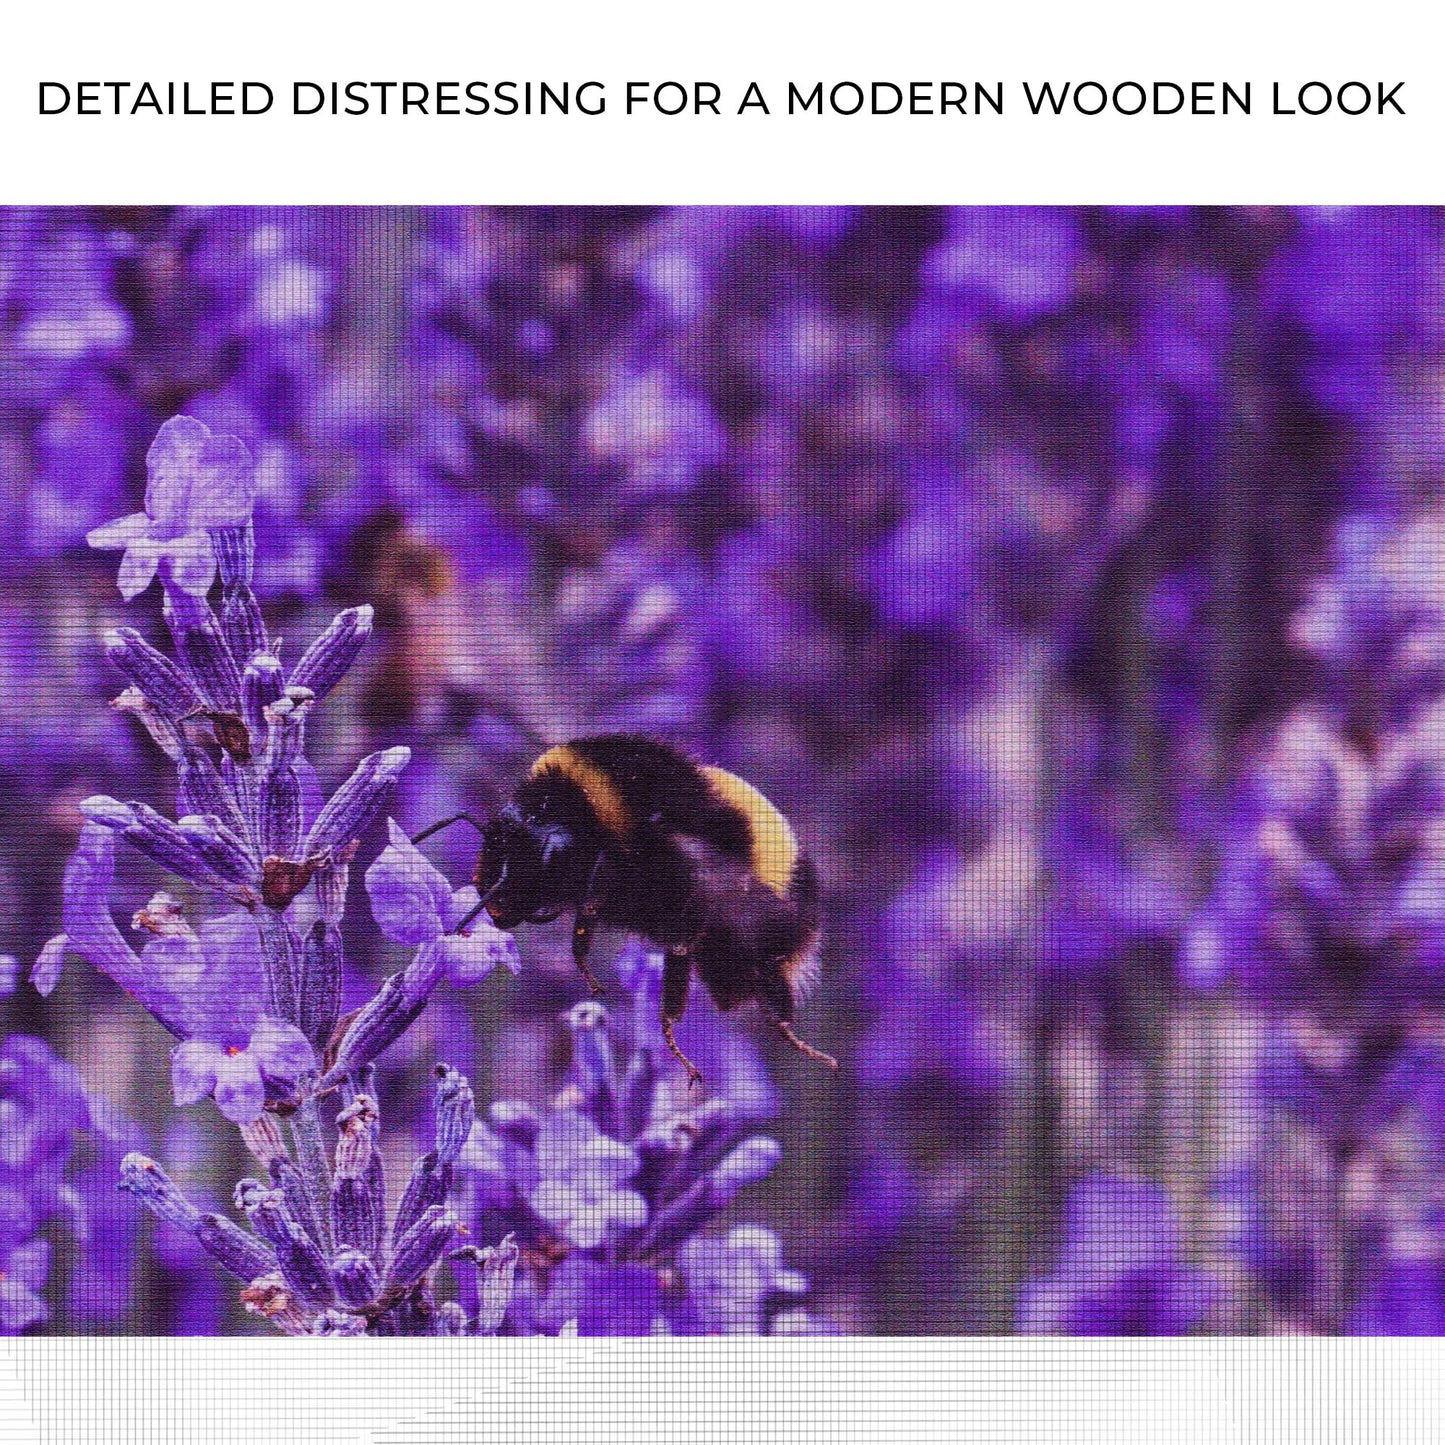 Bee Among Lavender Fields Canvas Wall Art Zoom - Image by Tailored Canvases